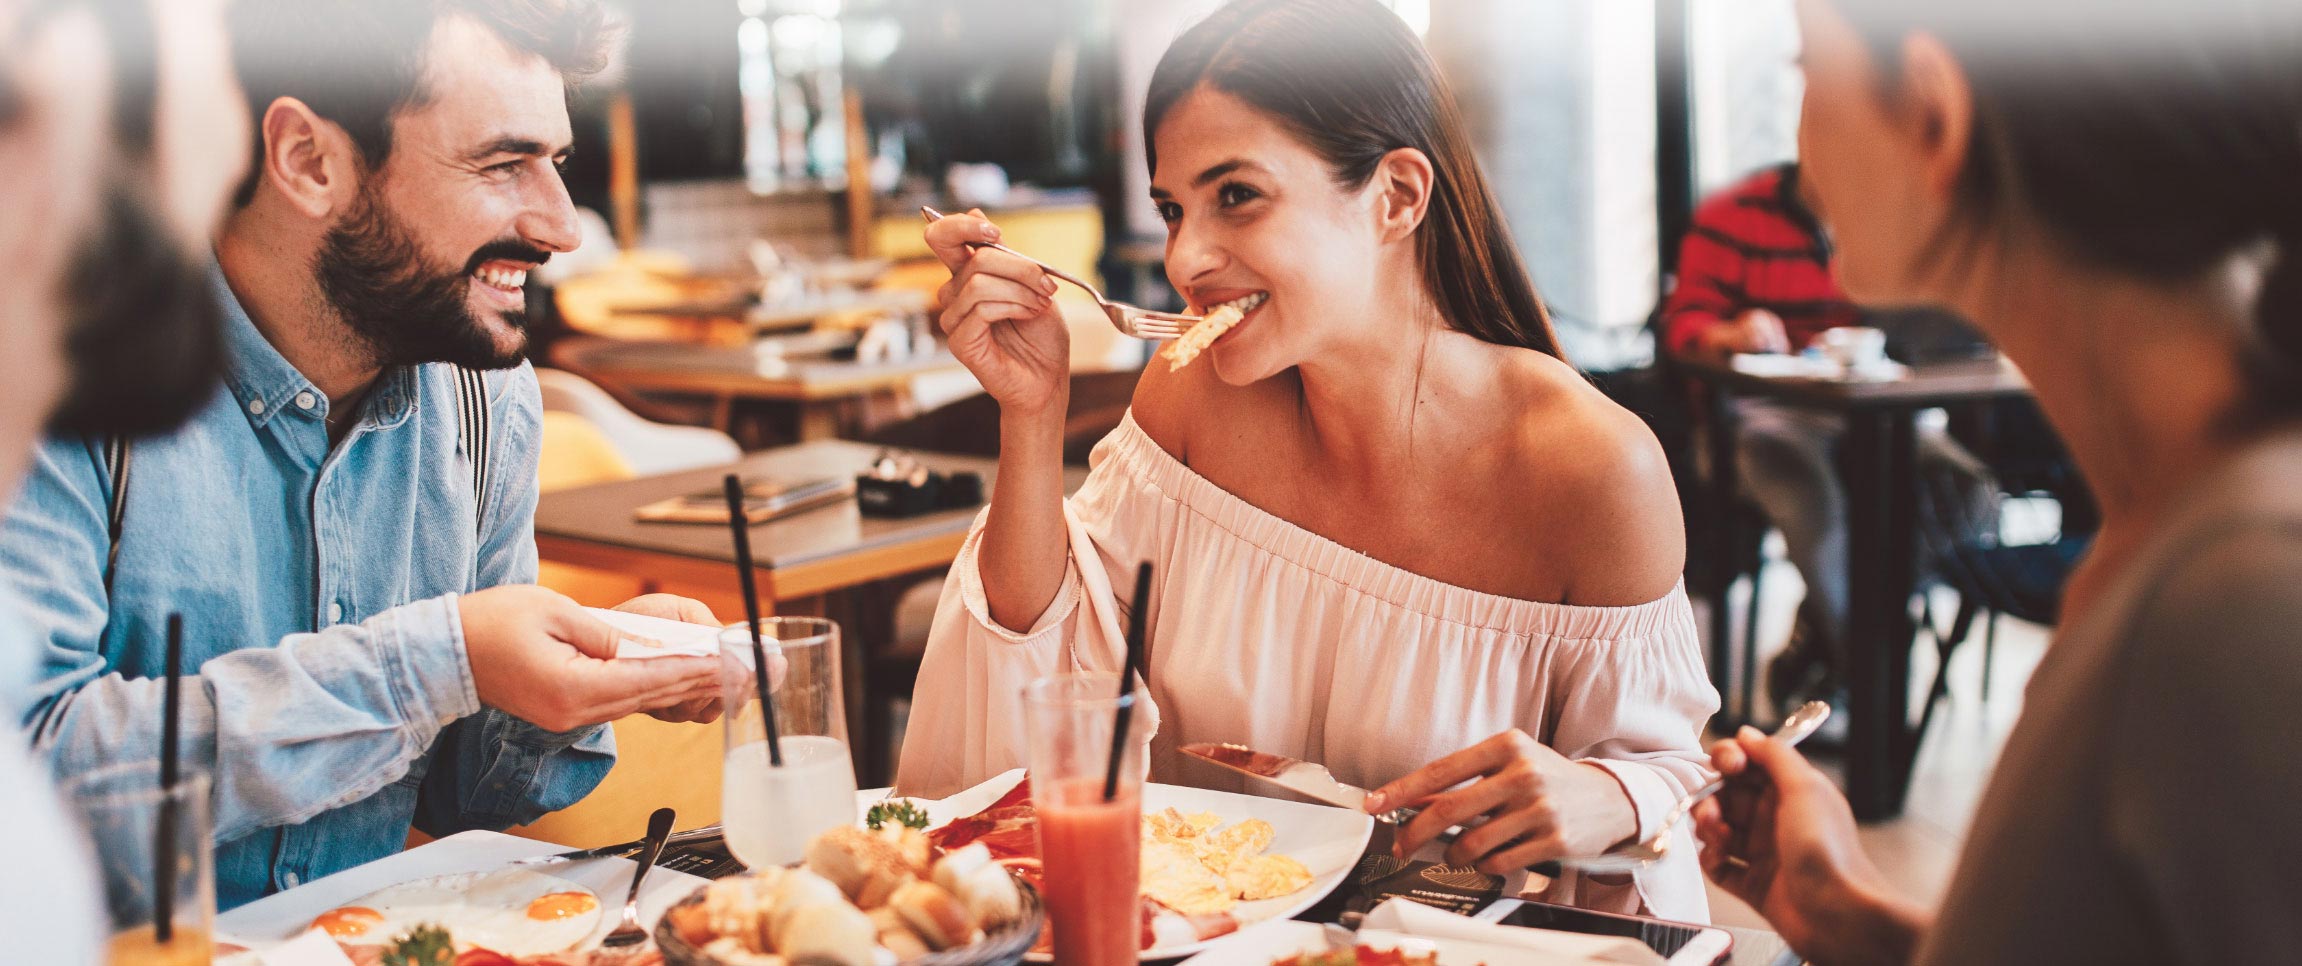 Learn How to Attract Millennials to Your Restaurant